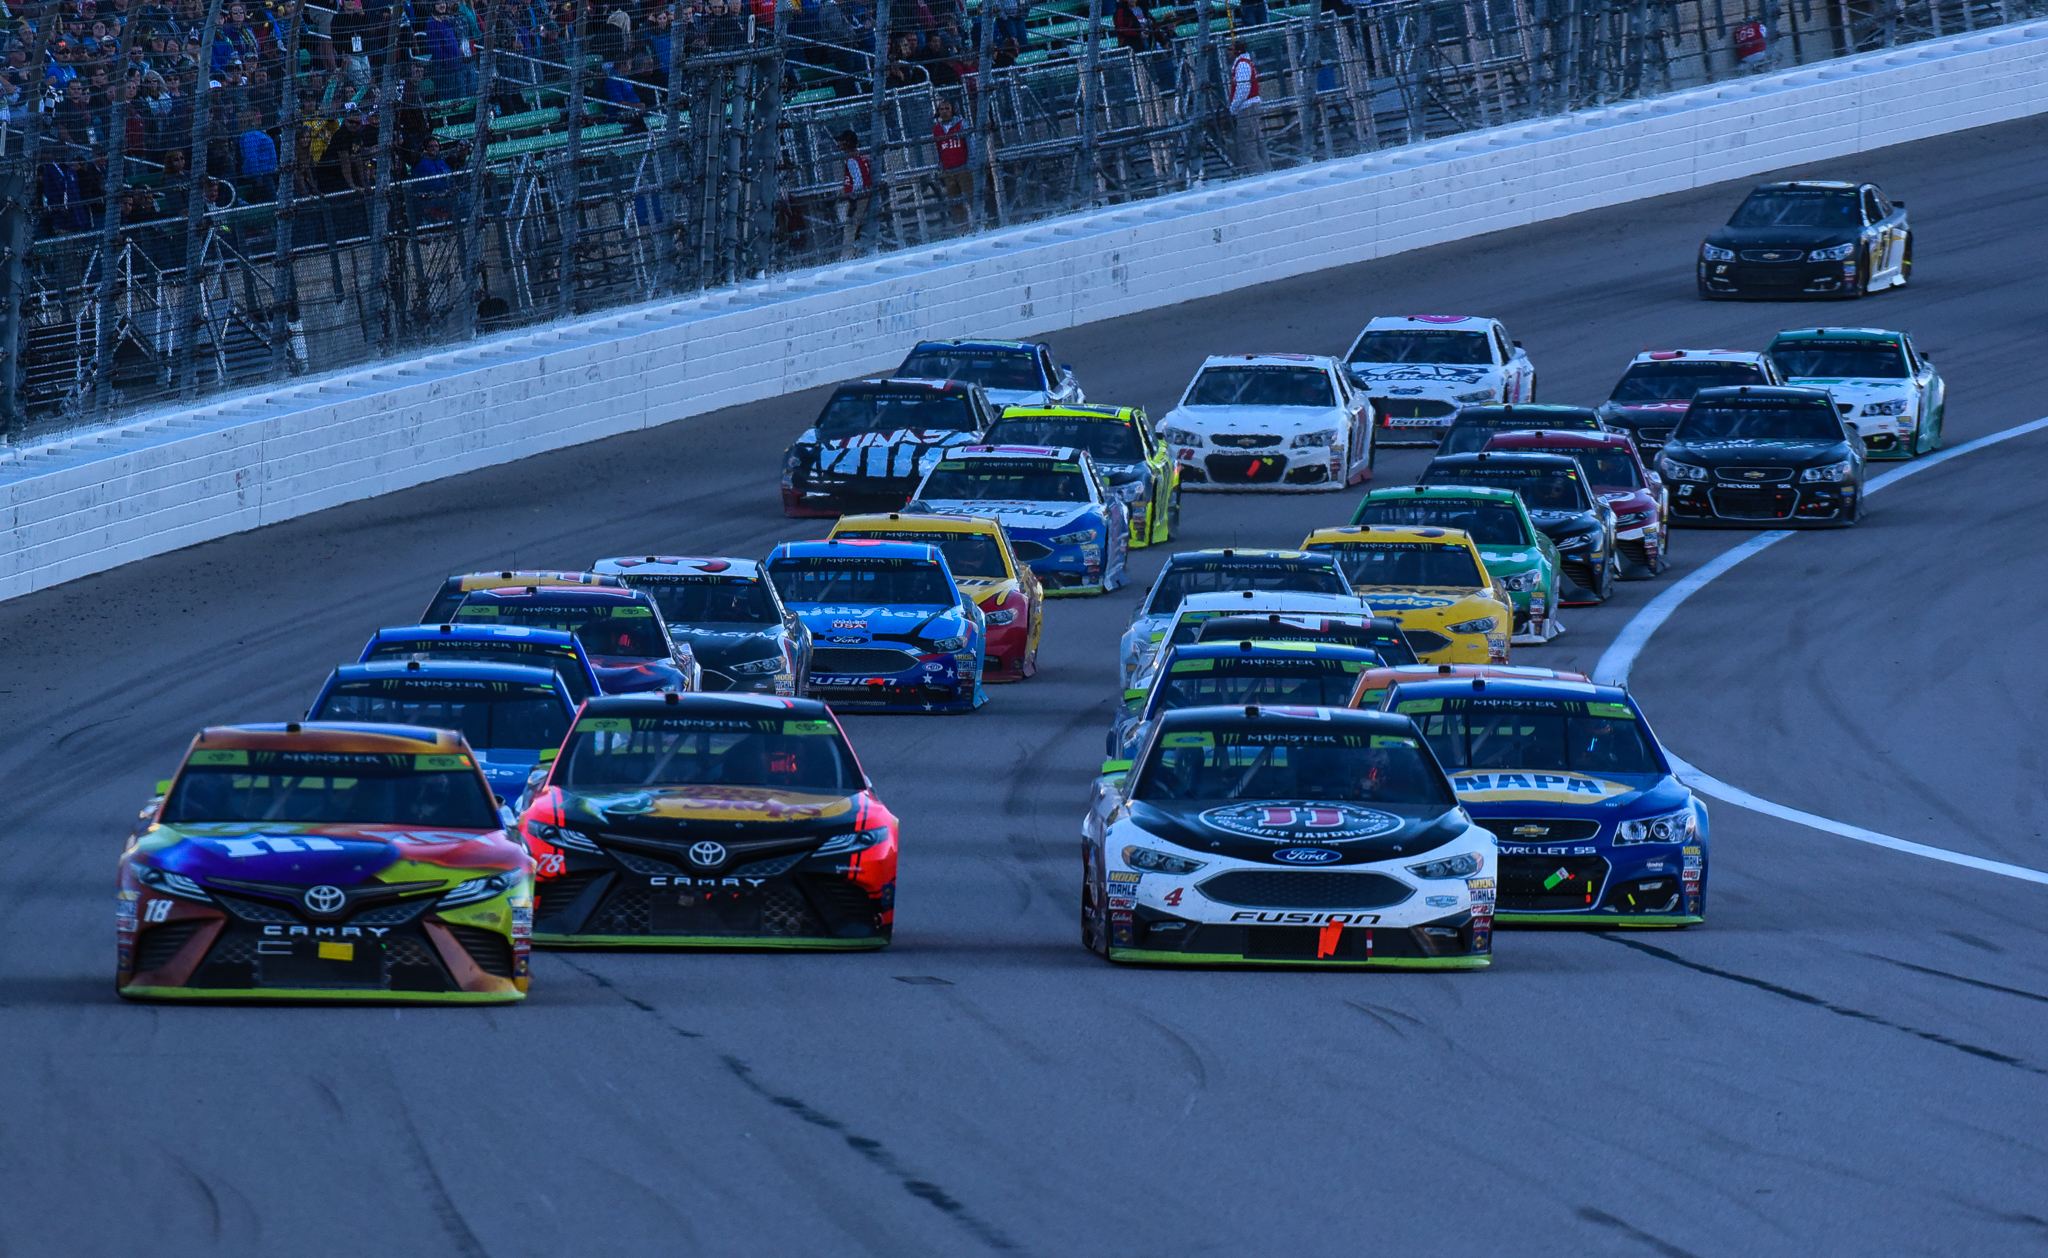 Should NASCAR's rules become officially accessible to the public? (Photo Credit: Jeremy Thompson)